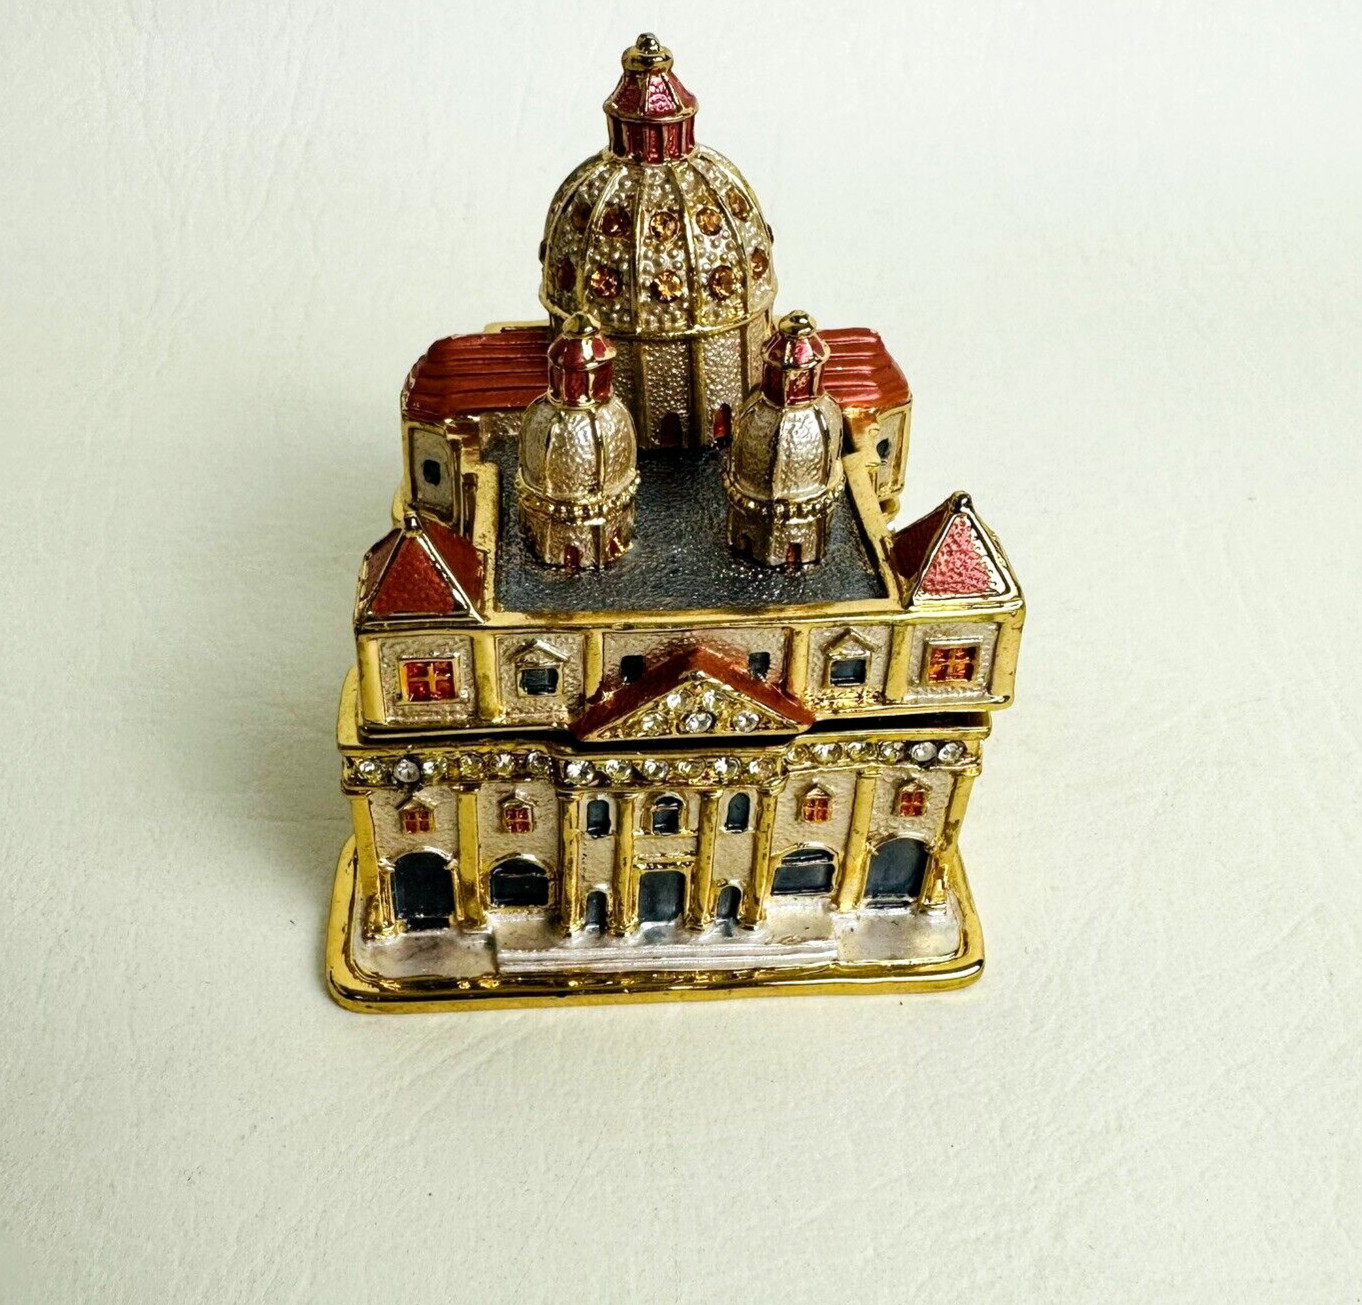 St Peter’s Church Bejeweled Enameled Hinged Trinket Box Gold Tone Collectible